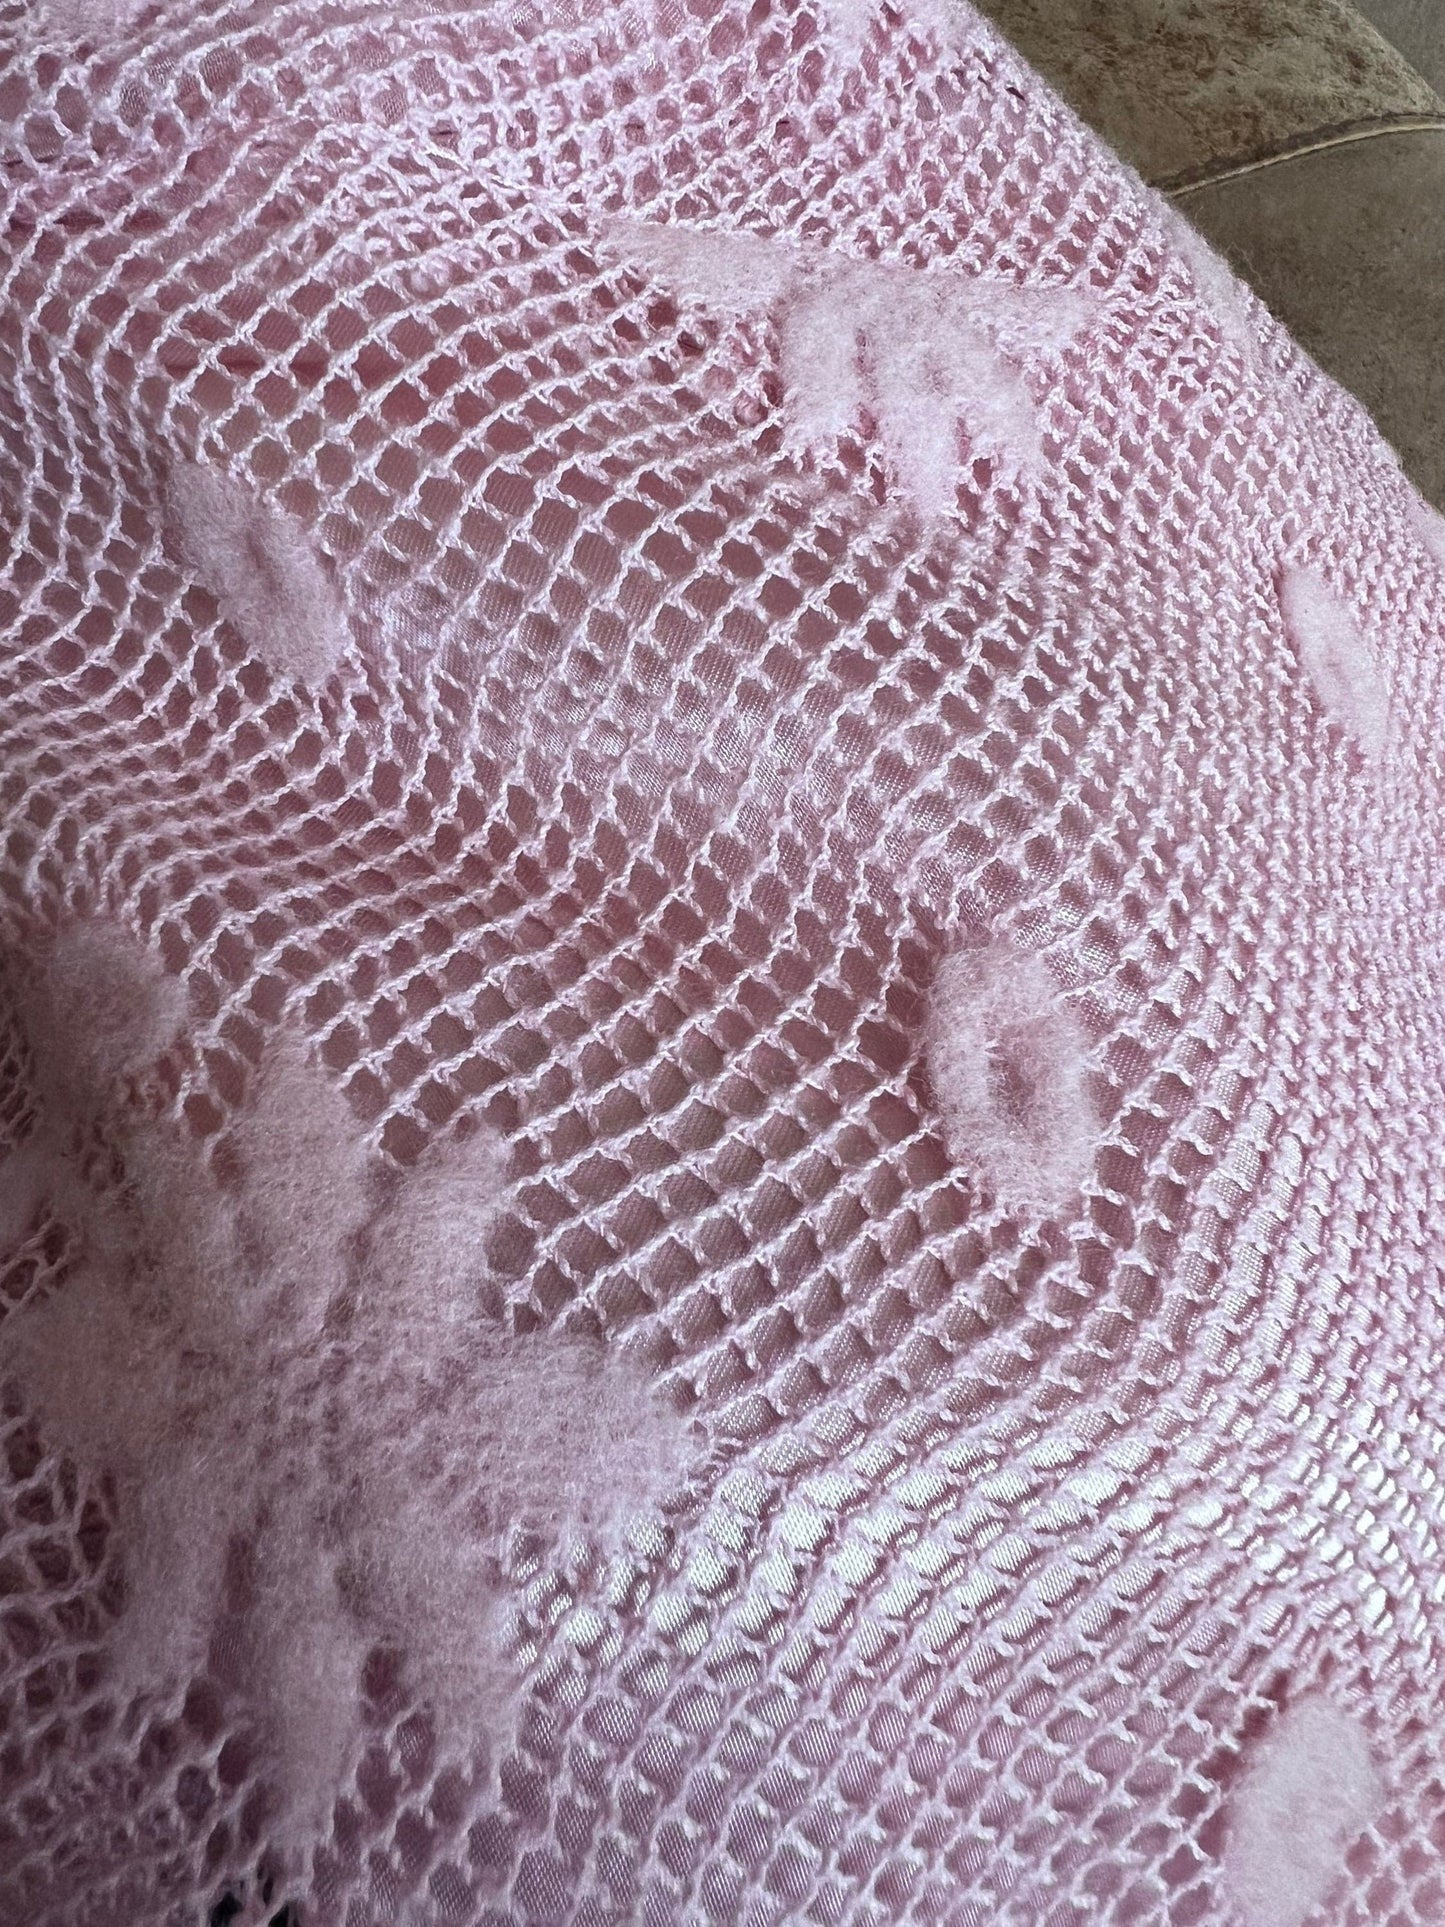 Vintage Pink Lace Overlayed Skirt - French Connection Stretch Lace UK12  Stretch Lace Lined Skirt - Unworn Y2K